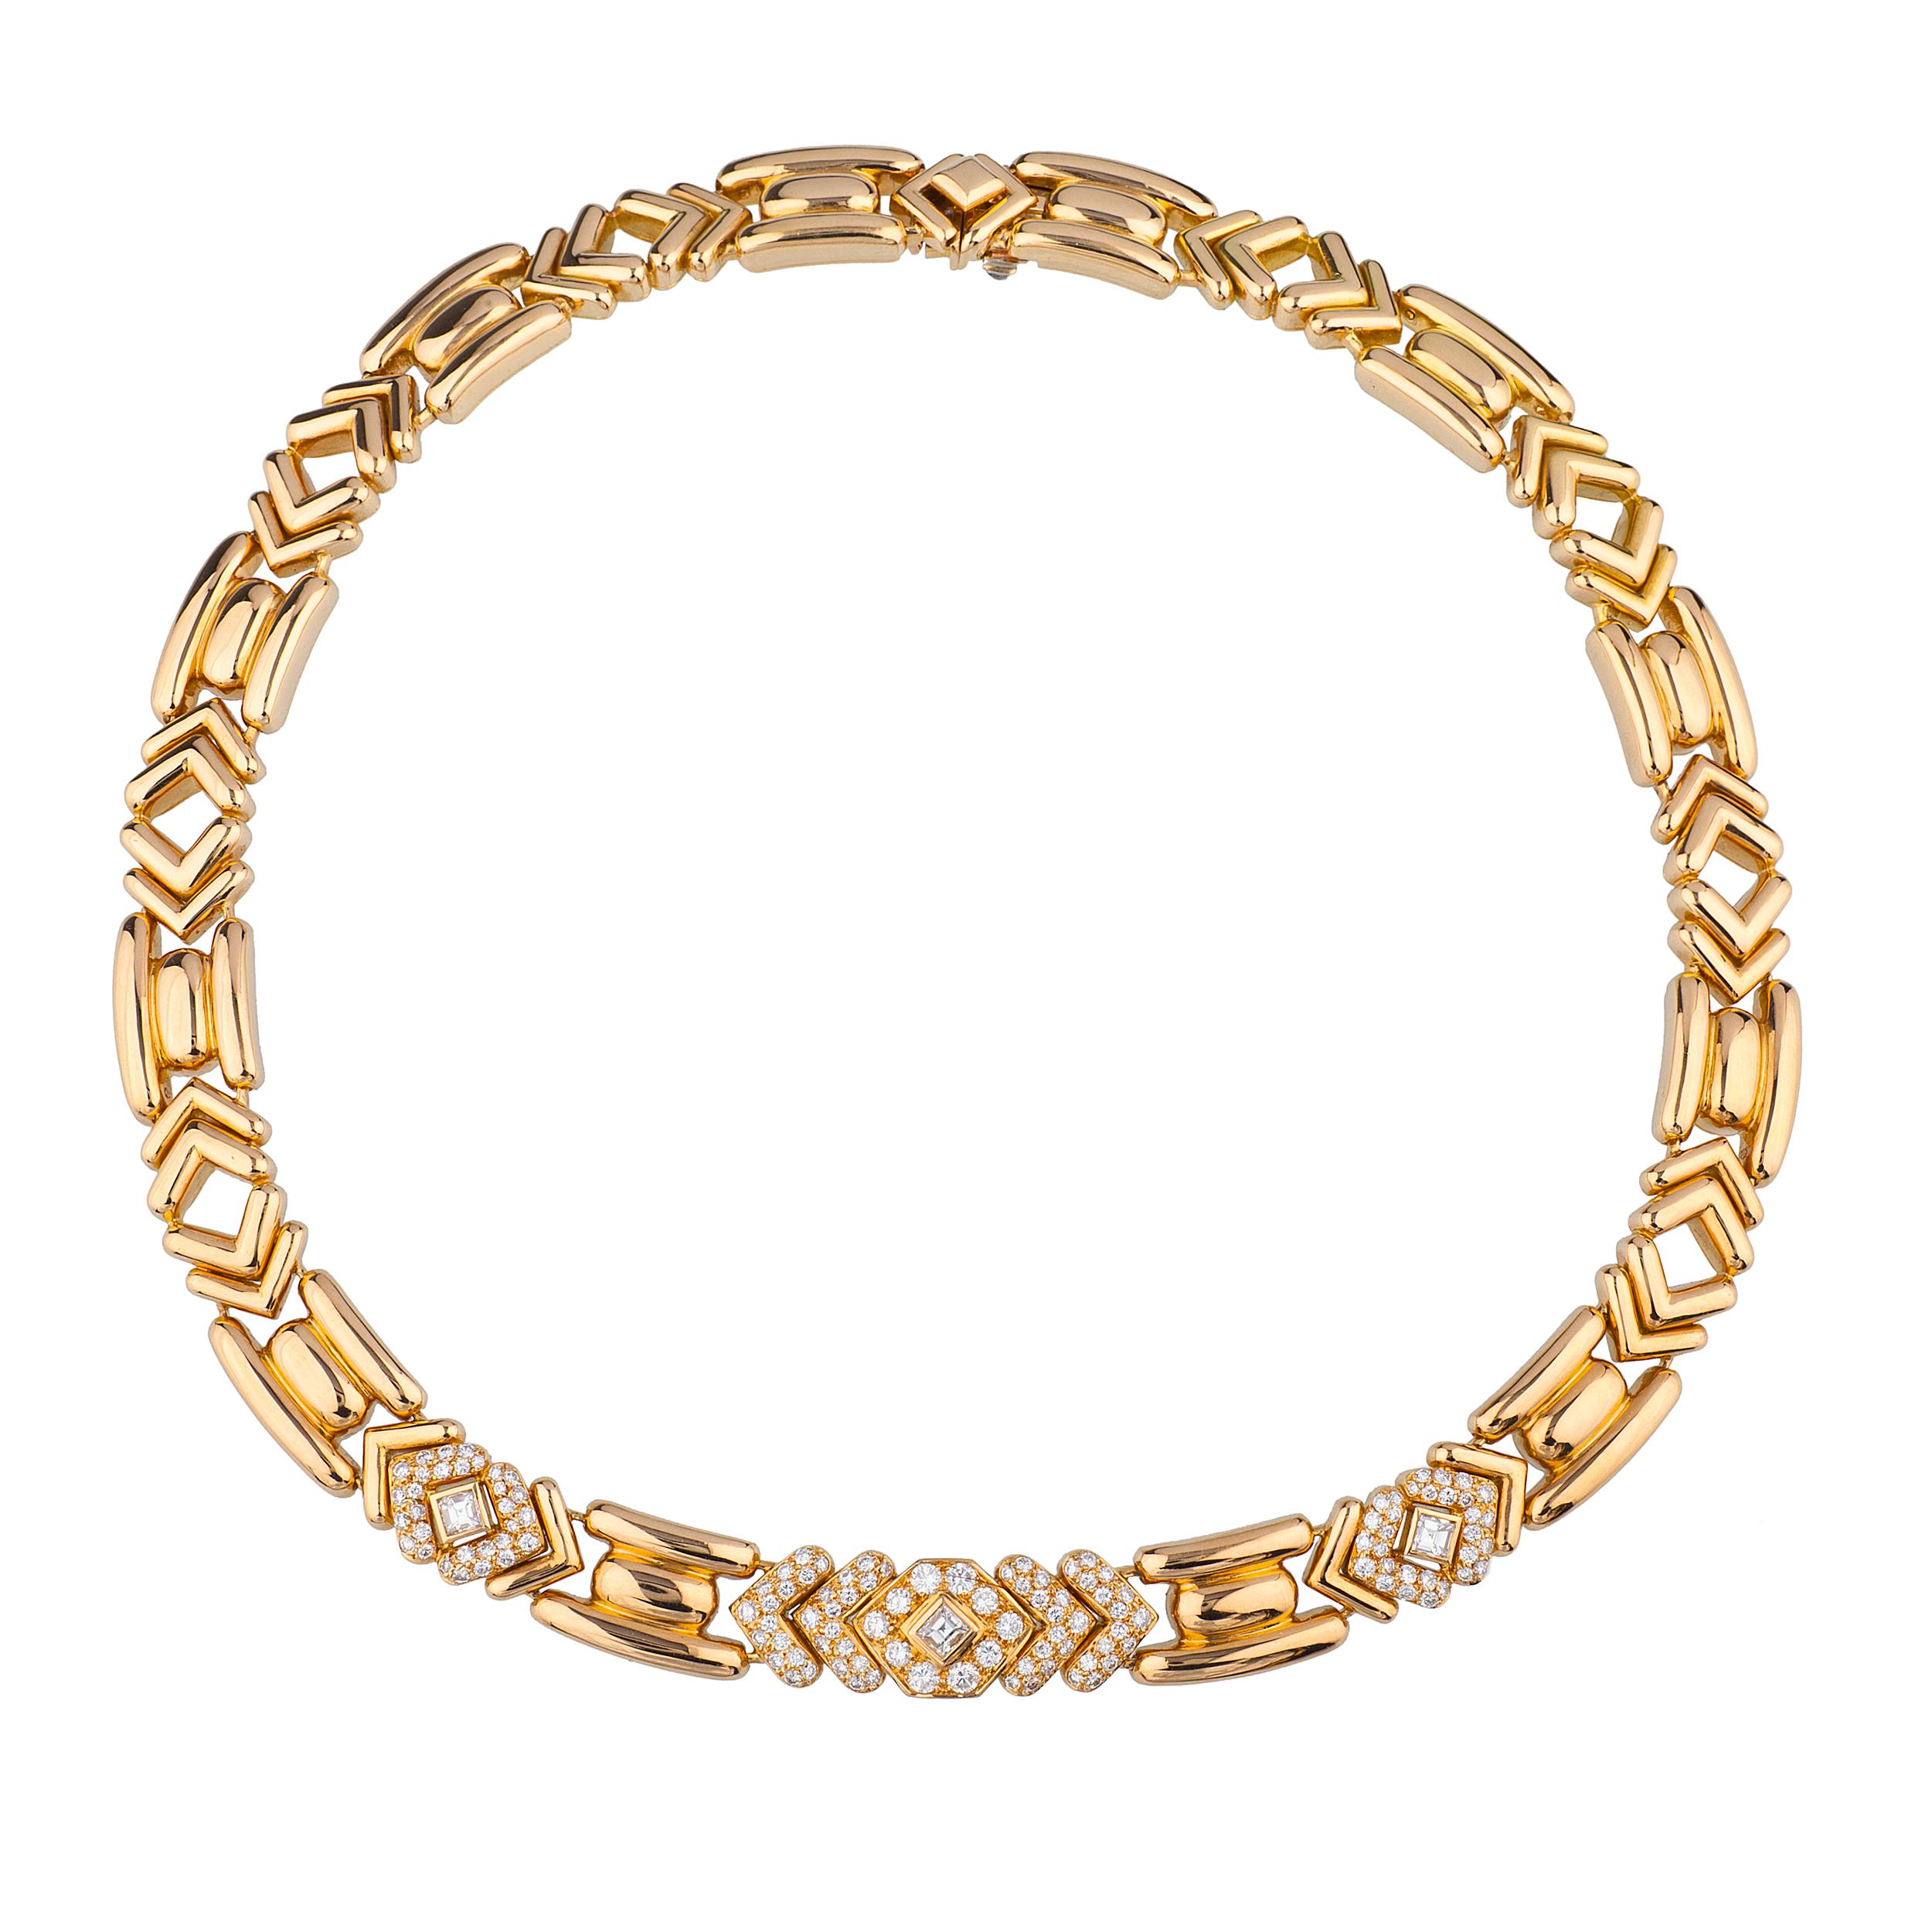 18k Bourcheron Necklace, Bracelet, Ring & Earring Suite with approximately 10.00 carats of diamonds.